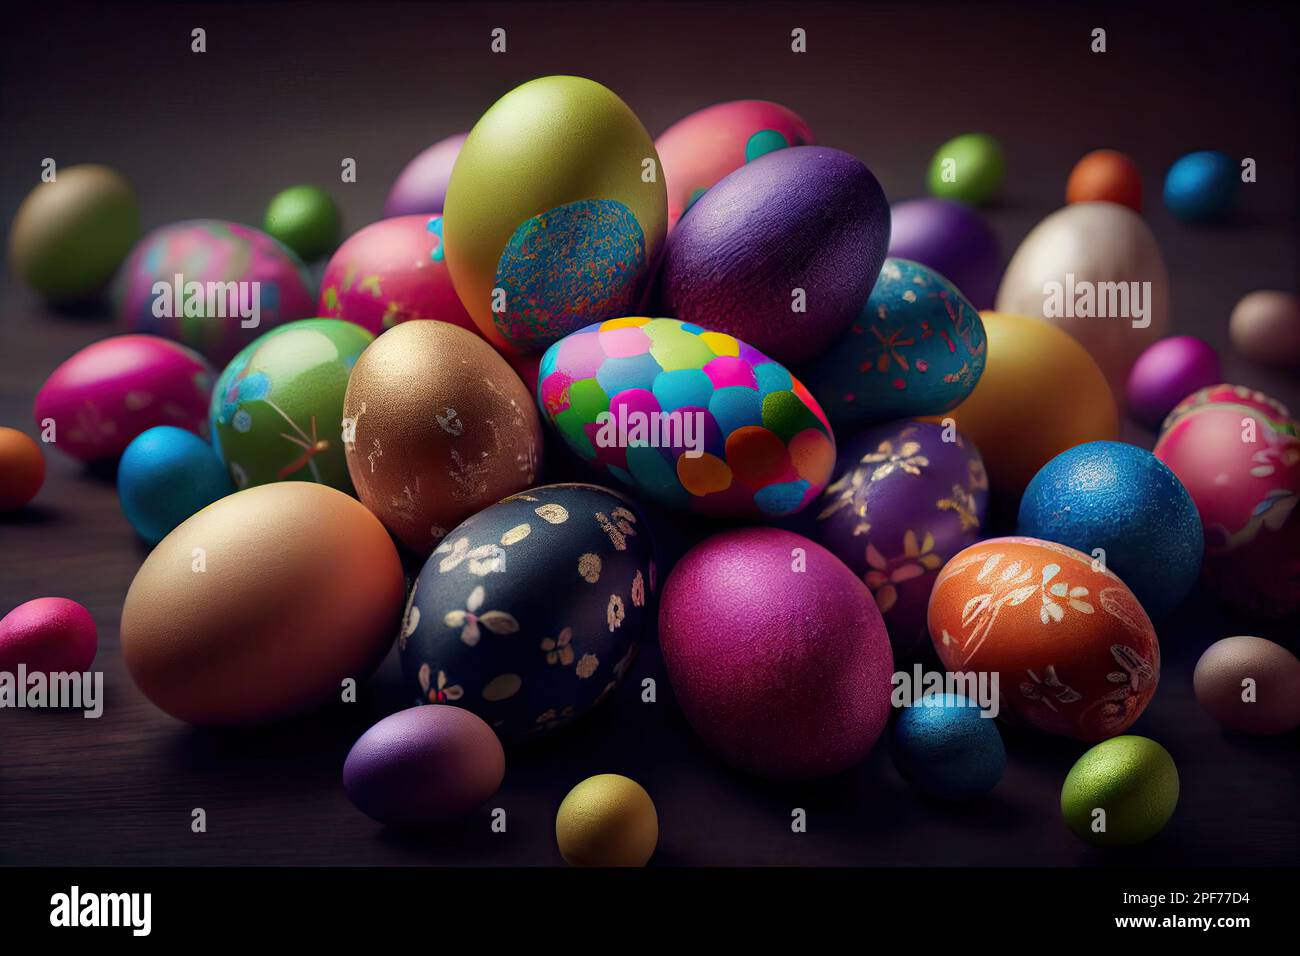 colorful easter eggs on a wooden table with flowers and leaves in the egg is surrounded by many smaller colored eggs Stock Photo